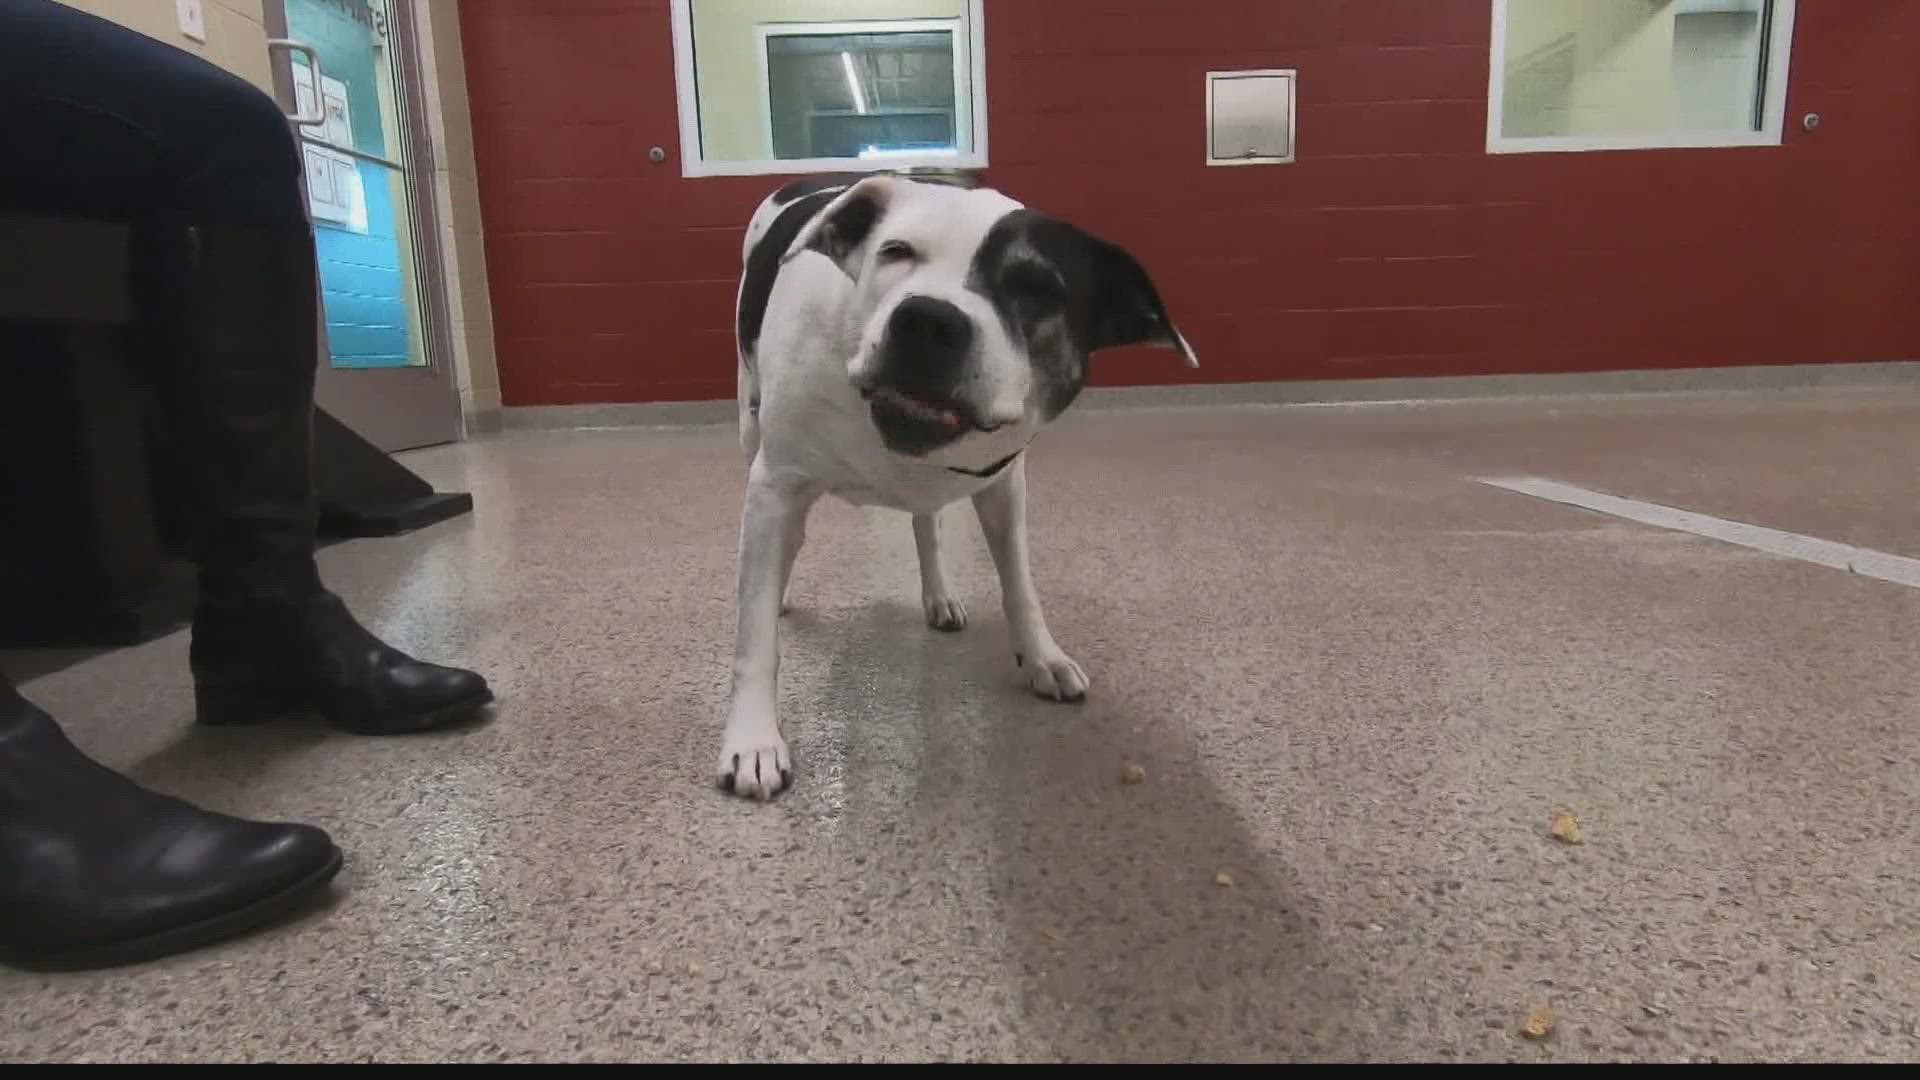 13Investigates reporter Cierra Putman takes a look at breed restrictions across Indiana - and how our state measures up to others on this issue.